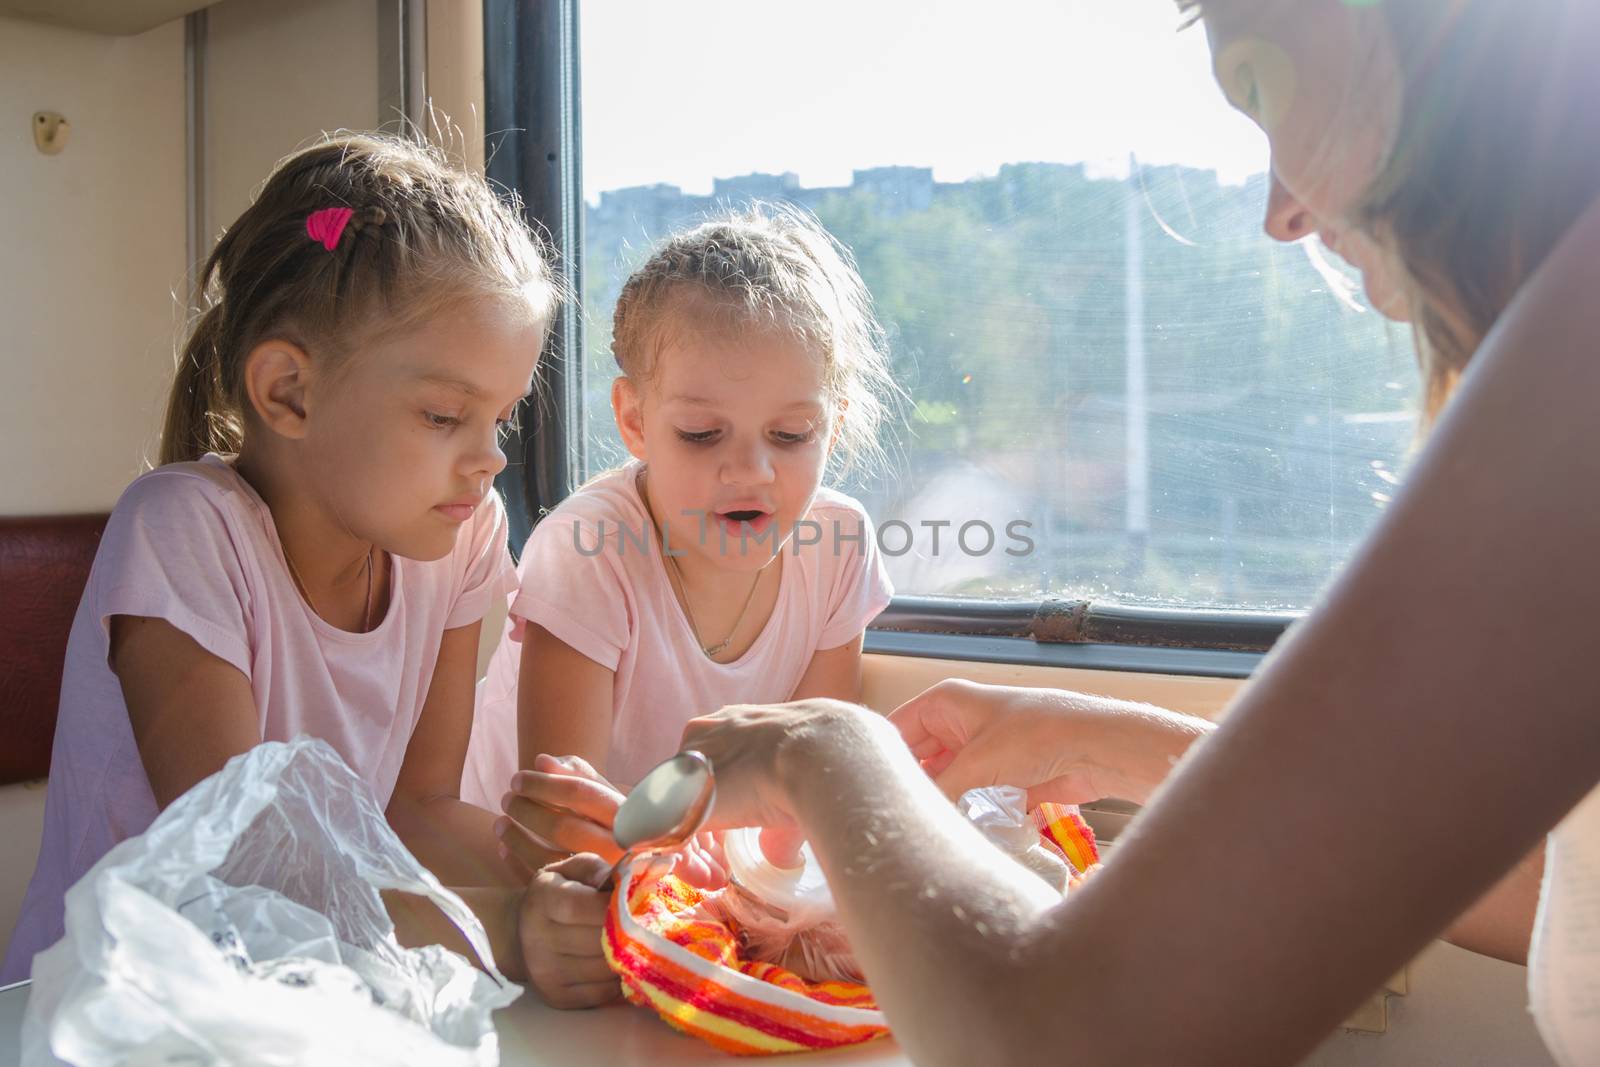 My mother unpacks the food for hungry children in second-class train carriage by Madhourse